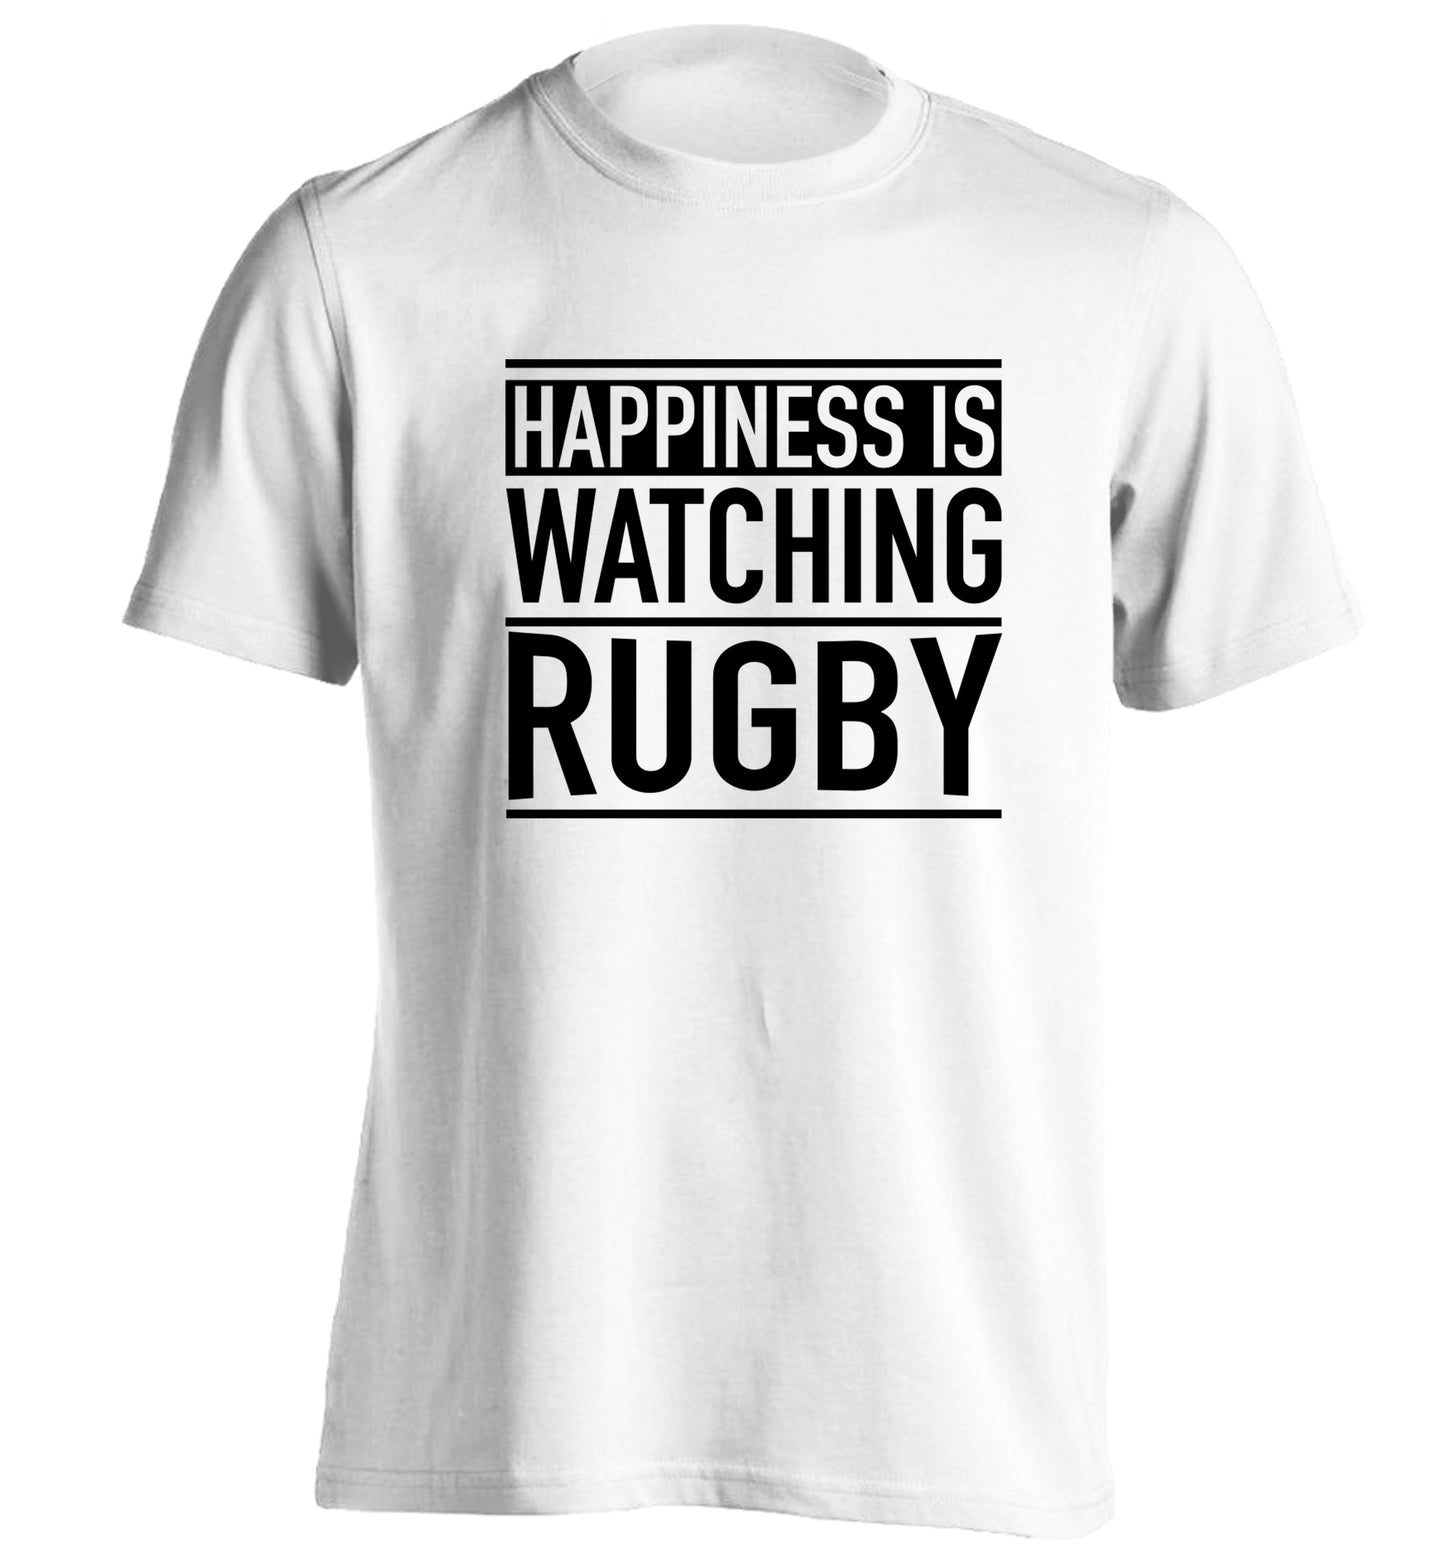 Happiness is watching rugby adults unisex white Tshirt 2XL